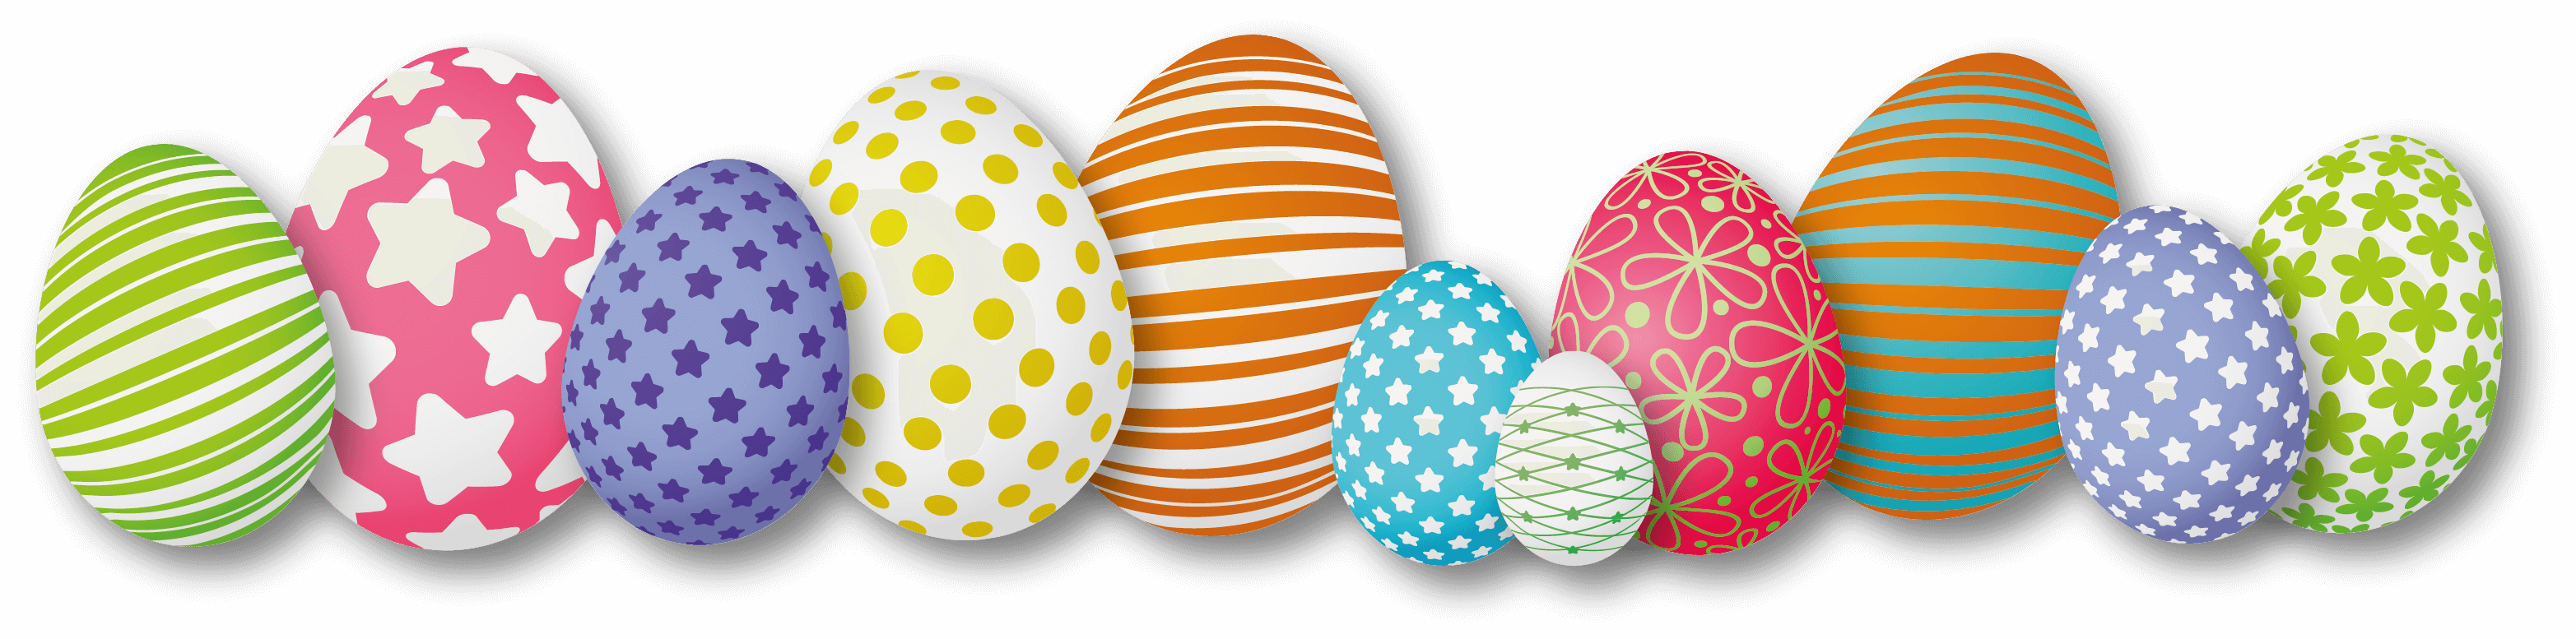 Download PNG image - Colorful Easter Eggs PNG Clipart 